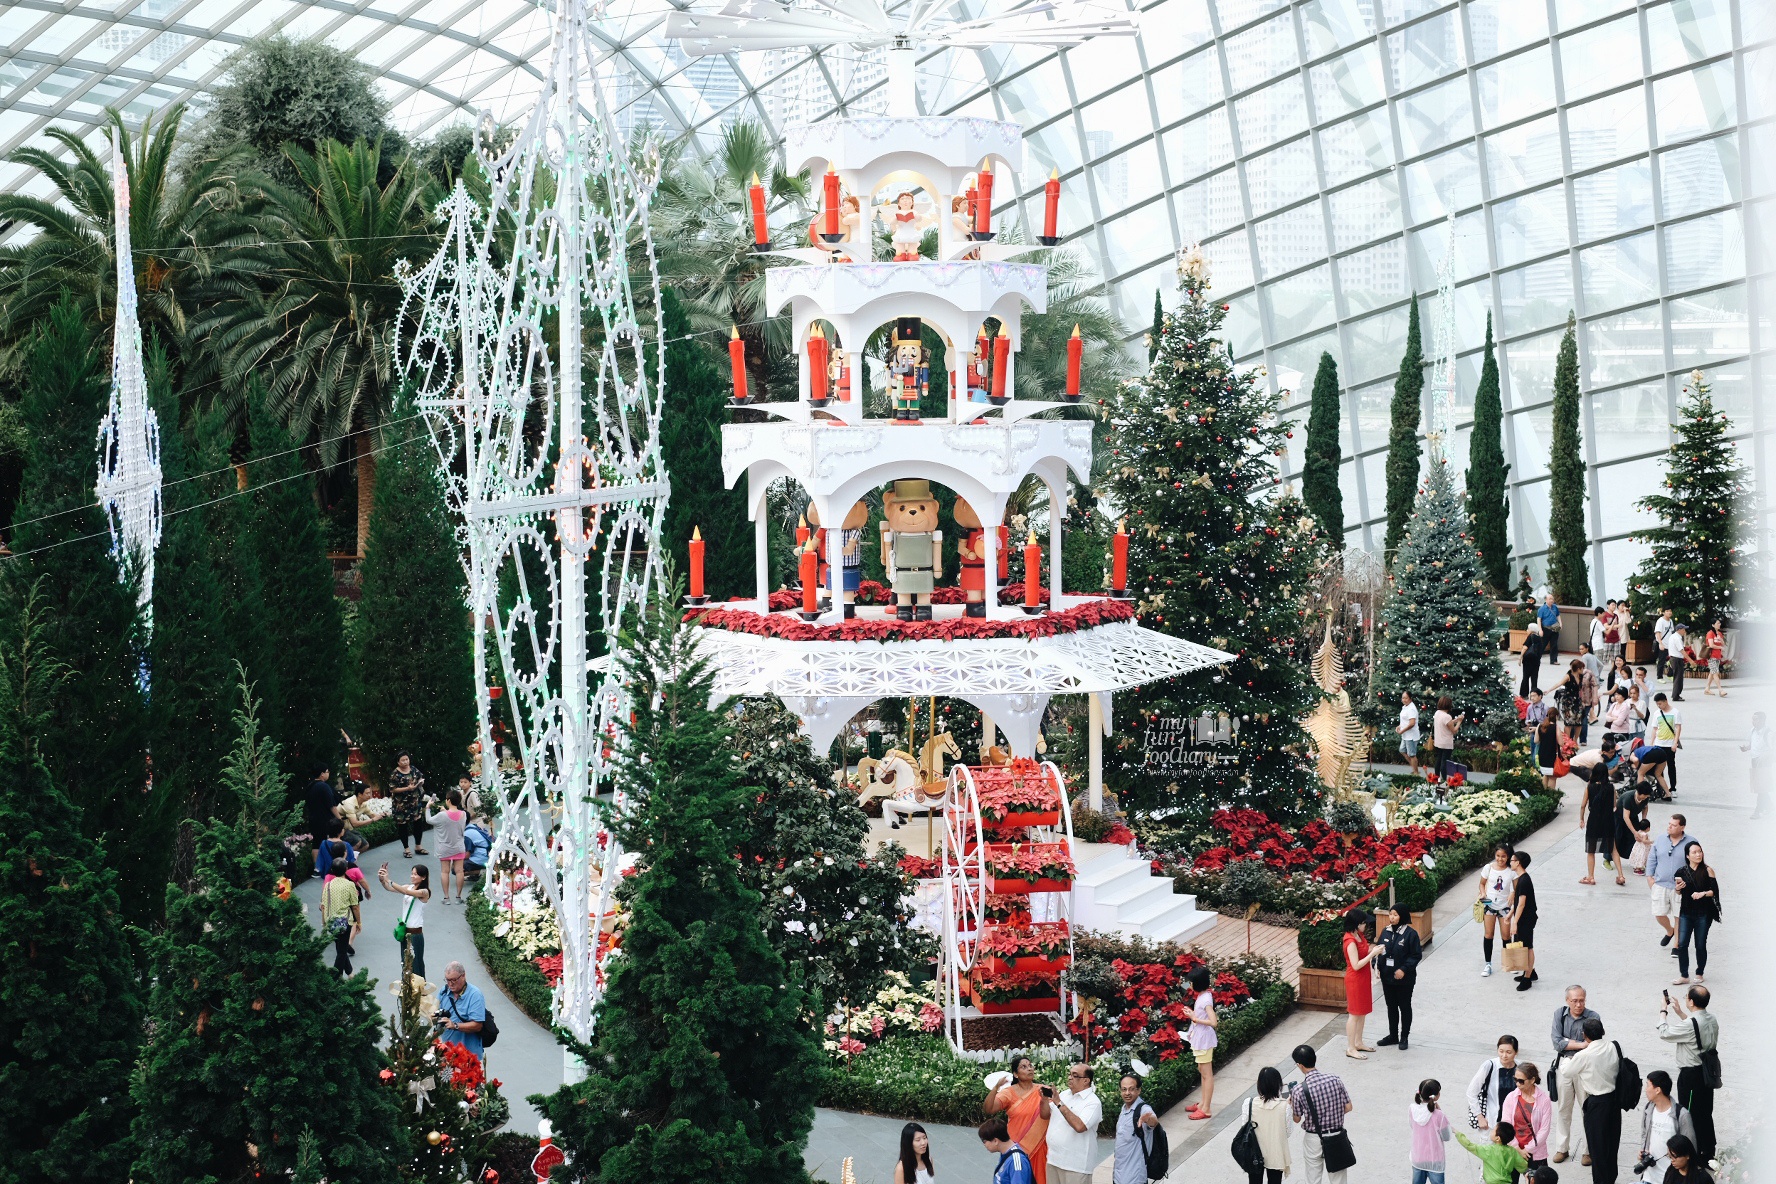 Christmas Toyland area inside the Flower Dome at Gardens By The Bay 2015 by Myfunfoodiary